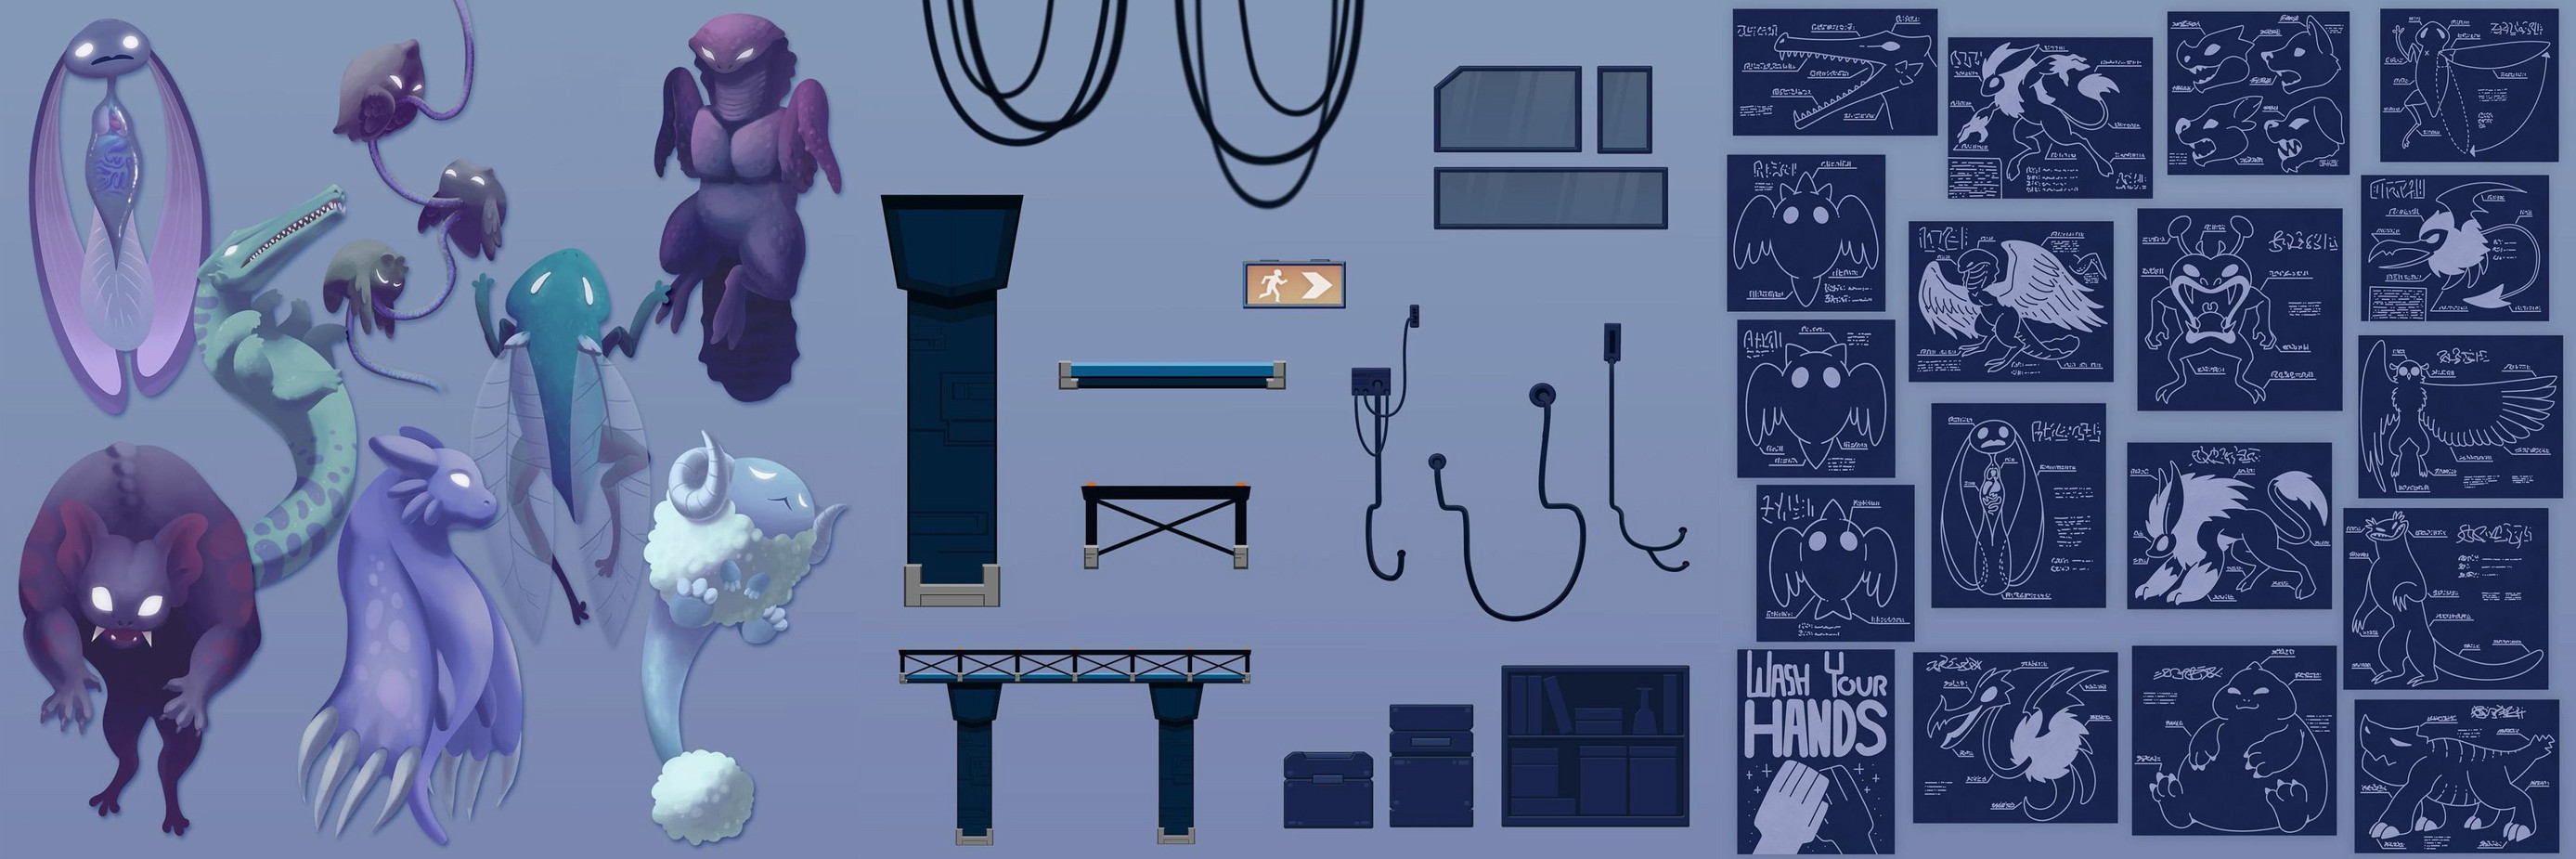 All the assets I made for the game 